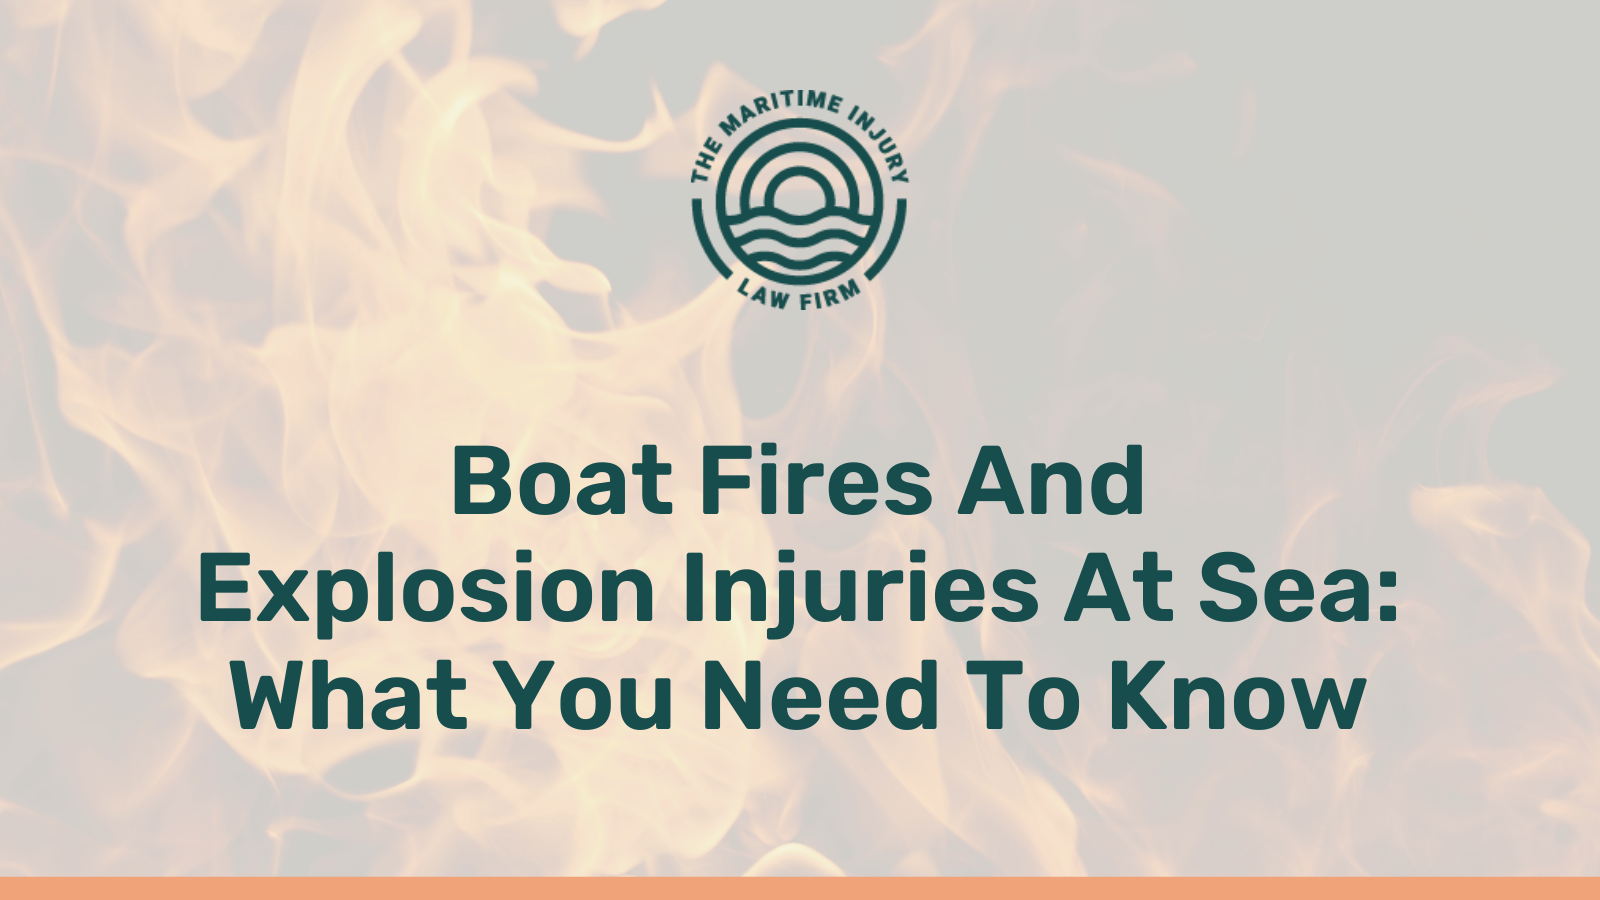 Boat Fires And Explosion Injuries At Sea: What You Need To Know